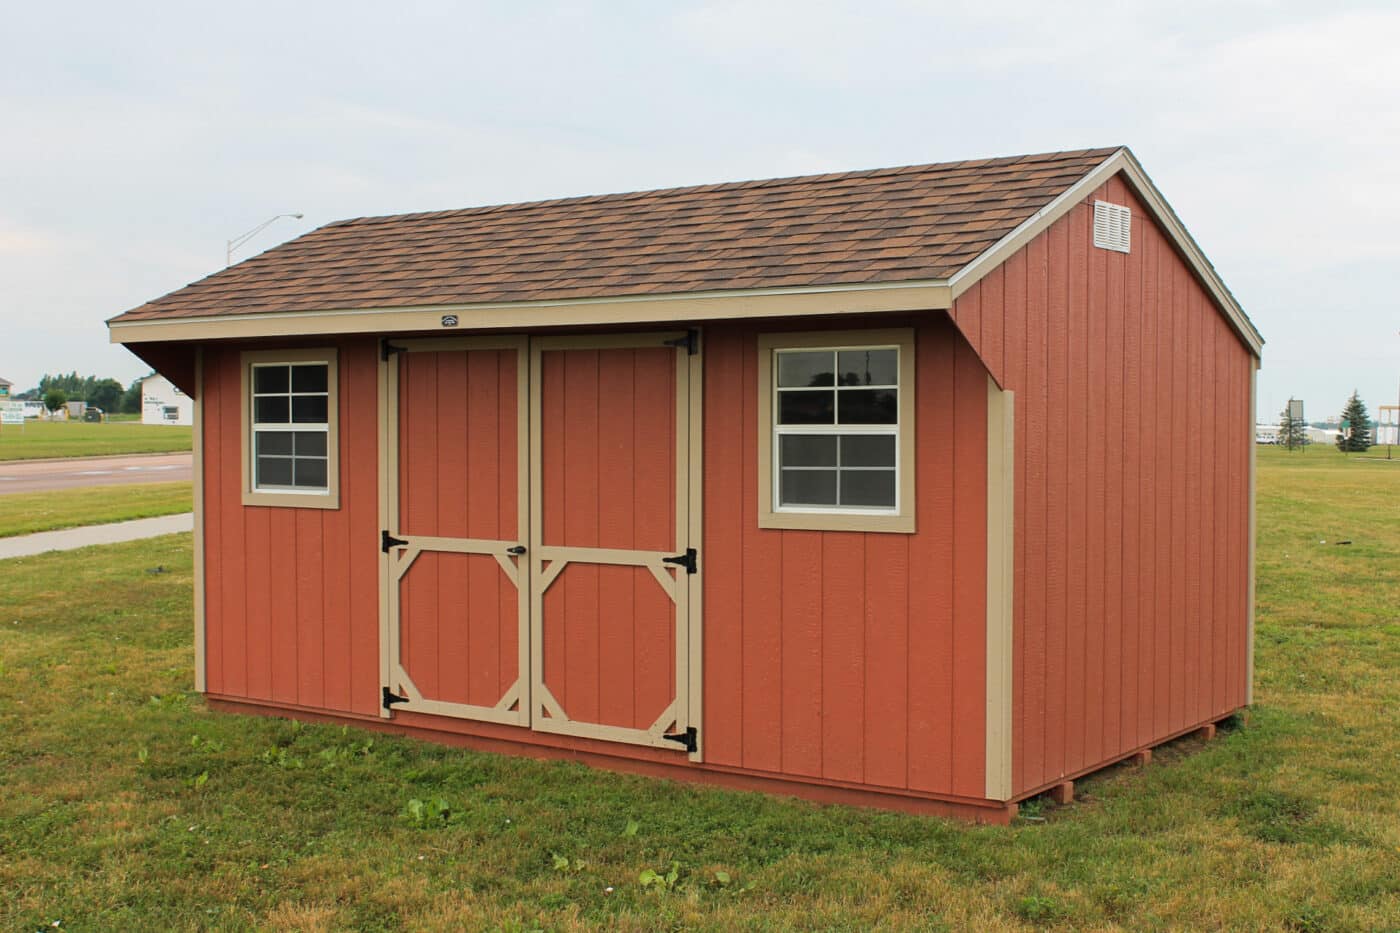 Red quaker storage shed in field